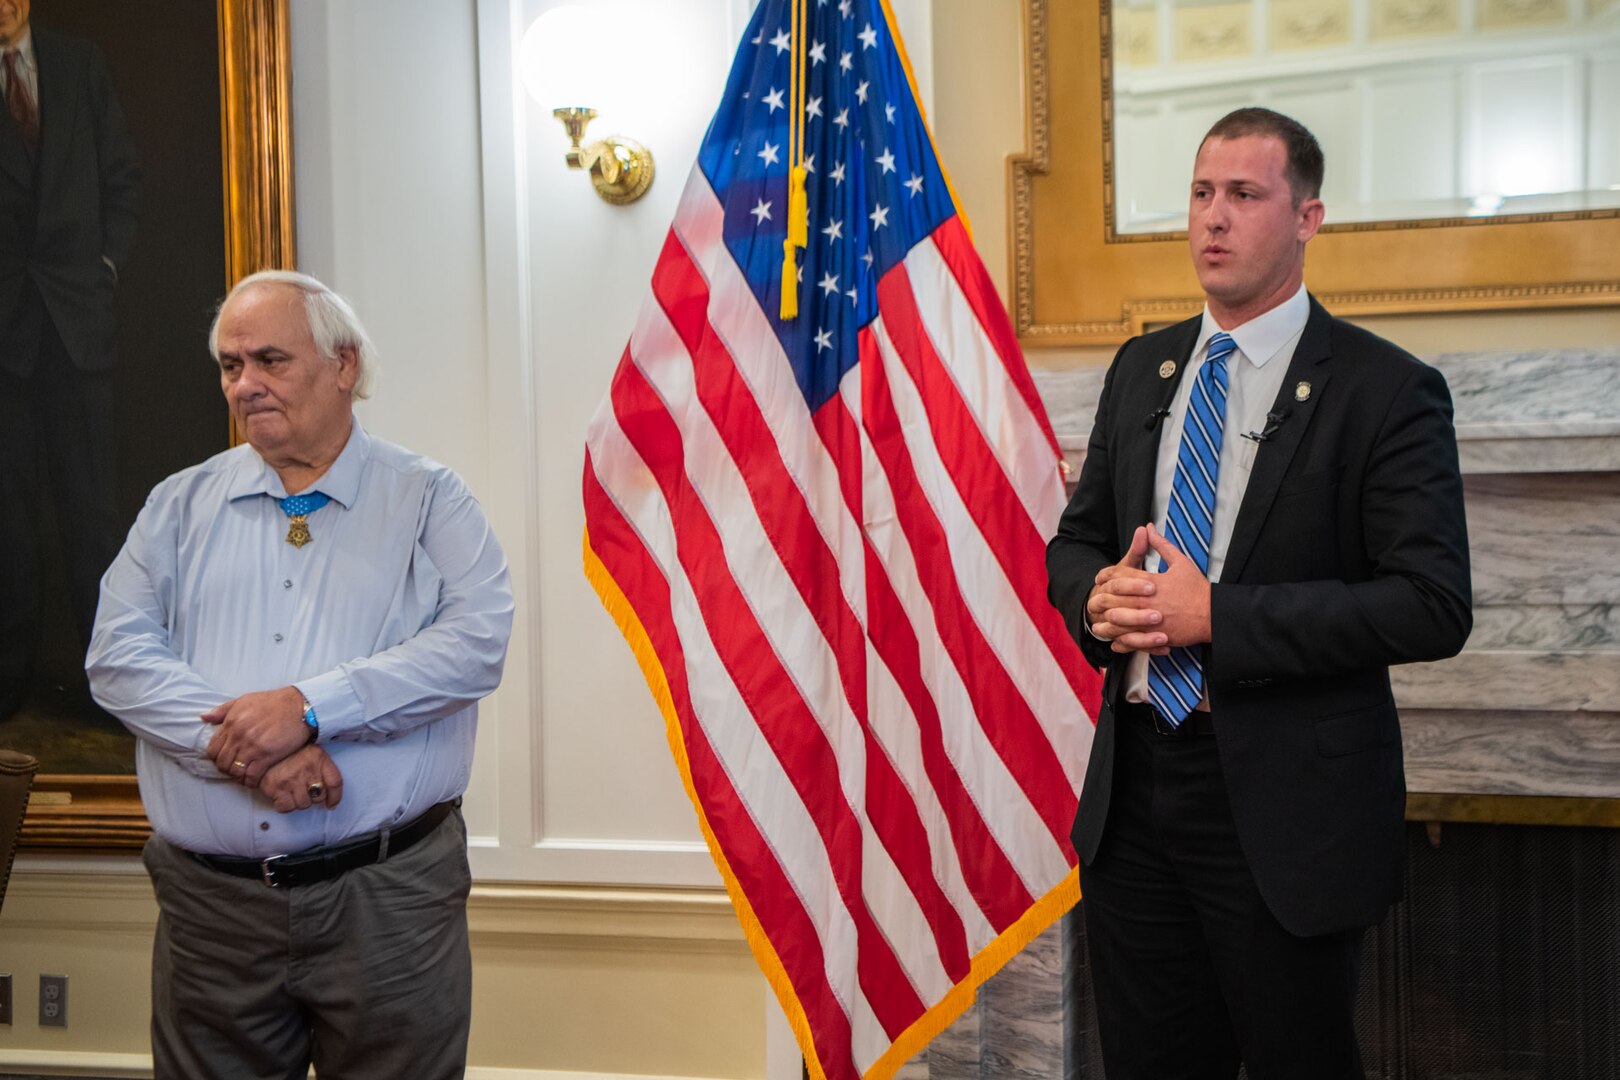 Tom Woods, an Oklahoma state senator, right, introduces former U.S. Army Spc. 5 Dwight W. Birdwell, a Medal of Honor recipient, after taking his oath of enlistment into the Oklahoma Air National Guard at the Oklahoma State Capitol on June 26, 2023, Oklahoma City. Birdwell earned two purple hearts, a Bronze Star for meritorious service and two Silver Stars during the course of his service in the Vietnam War. (U.S. Air National Guard photo by Airman Erika Chapa)